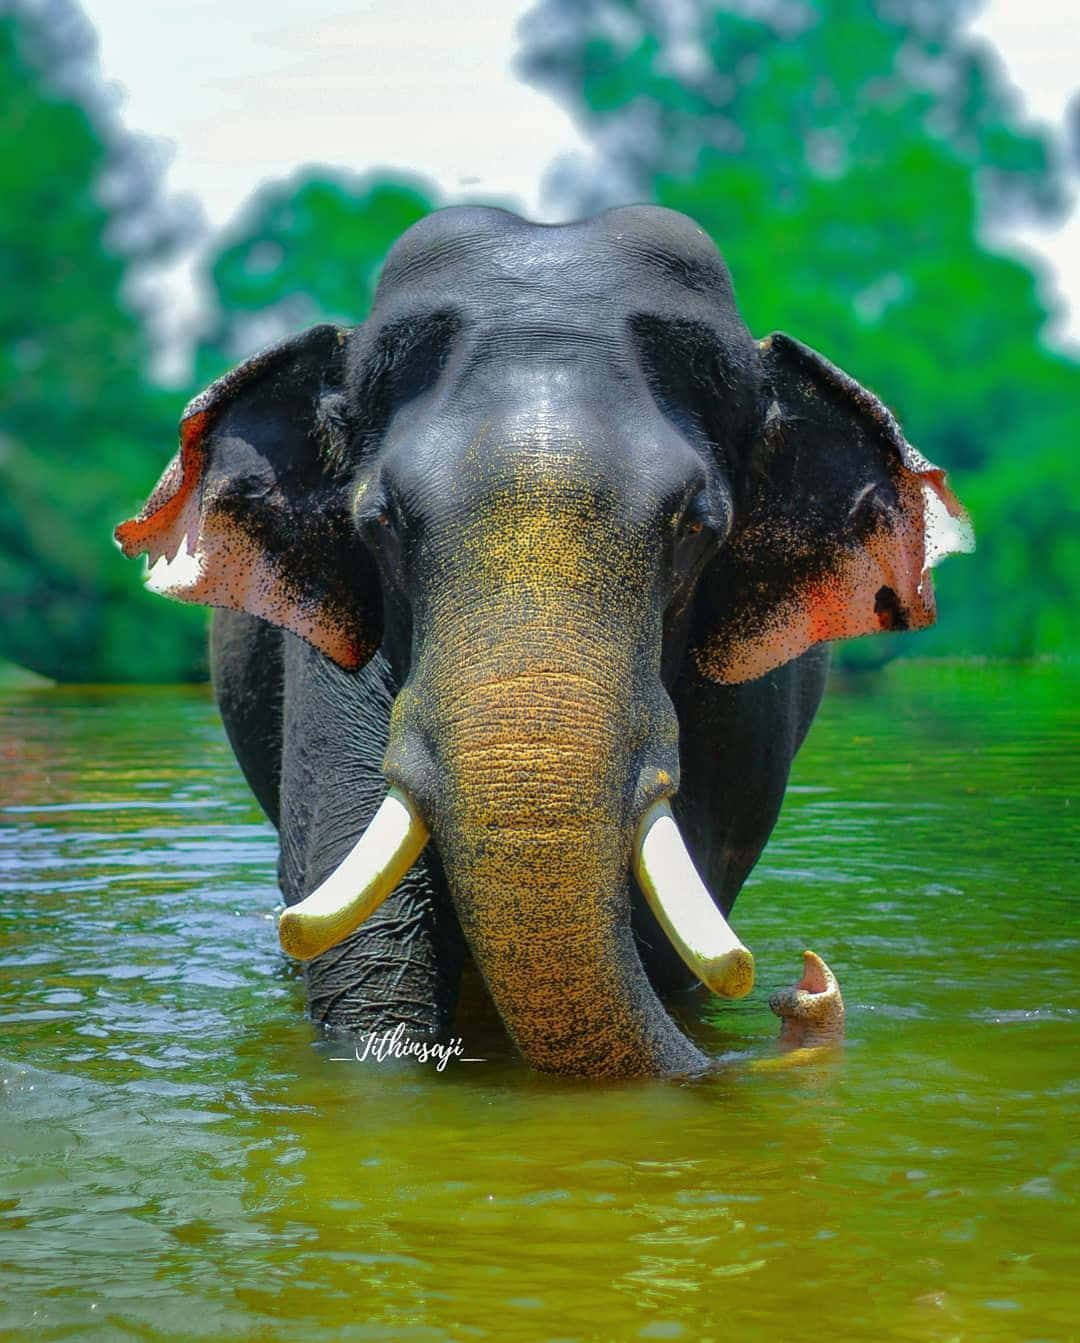 Best Elephant Background Walking At The River Background